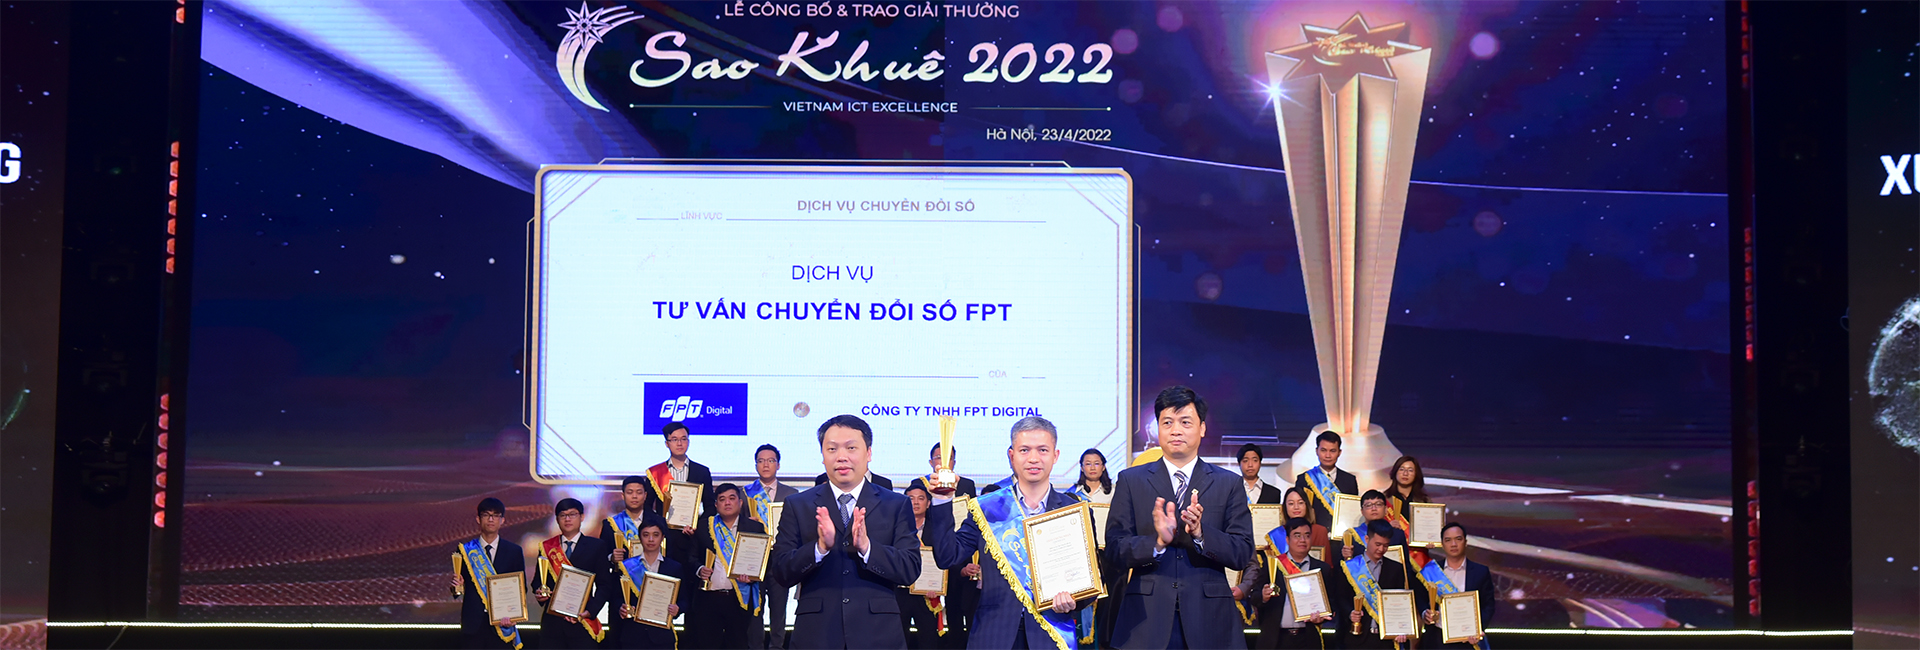 FPT Digital – the first unit to win the Sao Khue Award for Digital Transformation Consulting Service